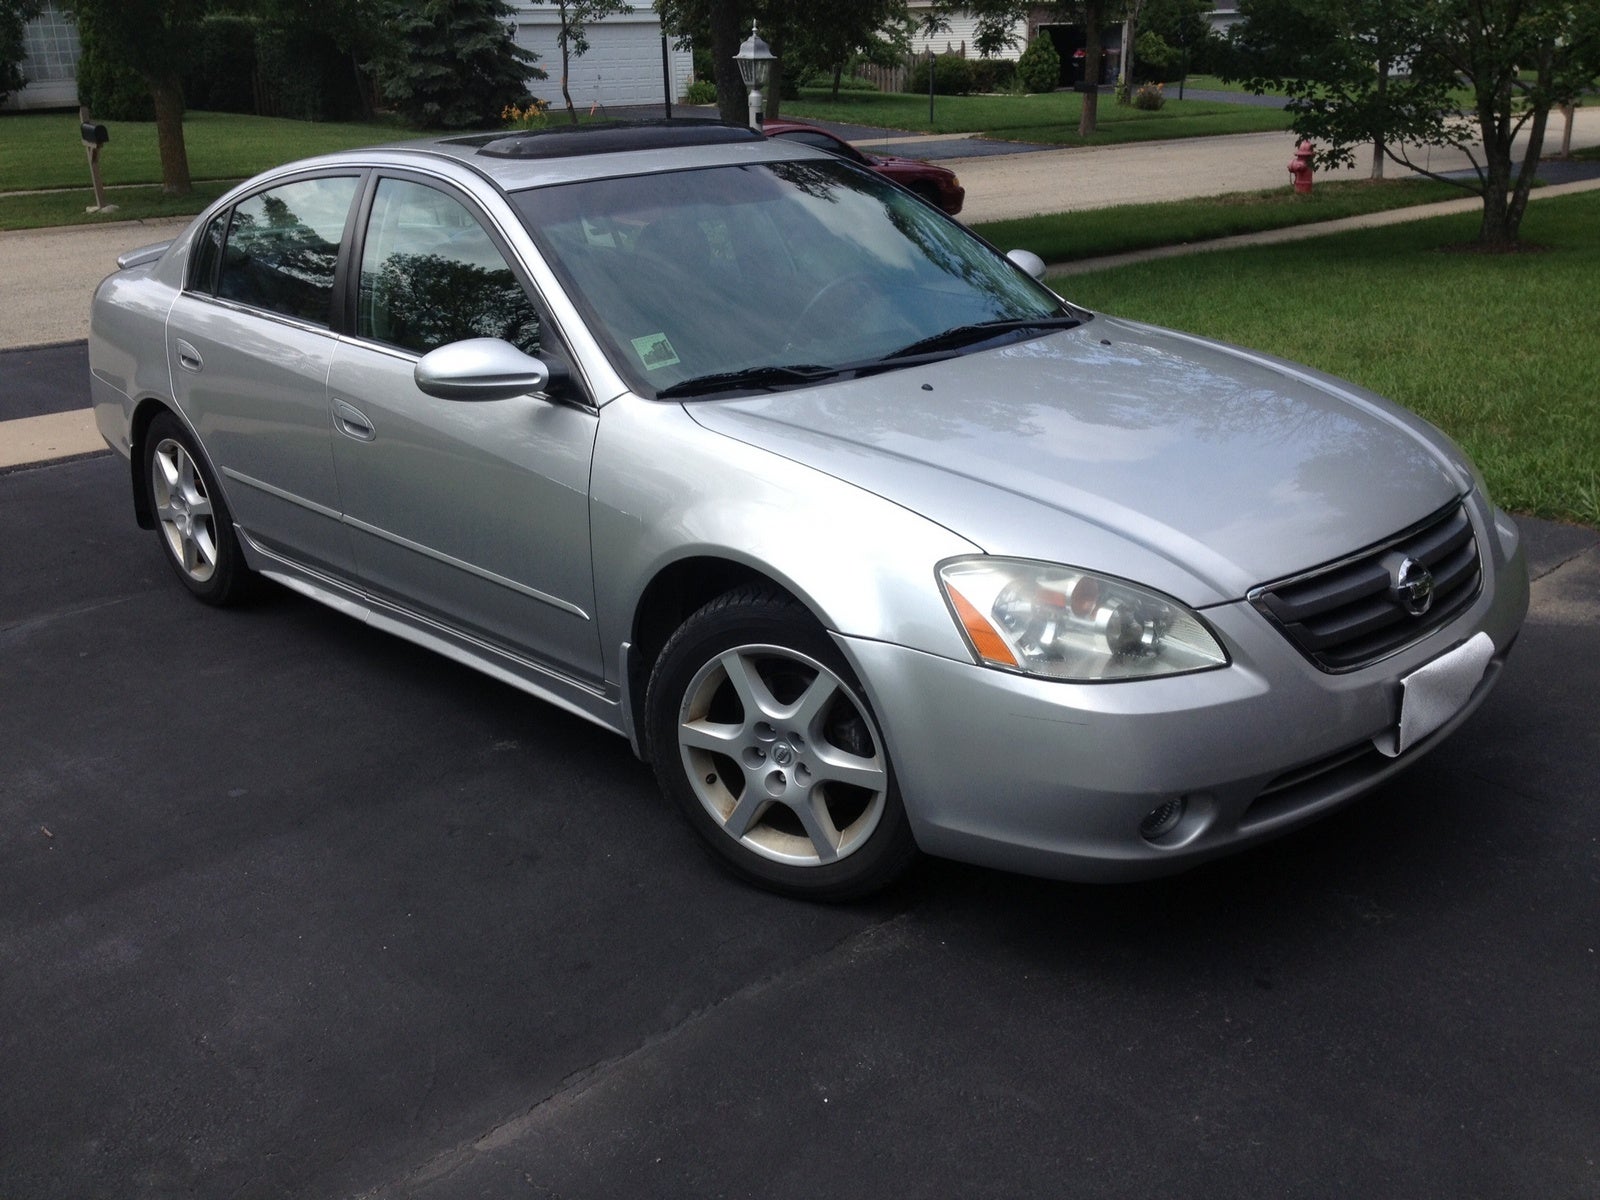 2003 Nissan altima 3.5 se specifications #3